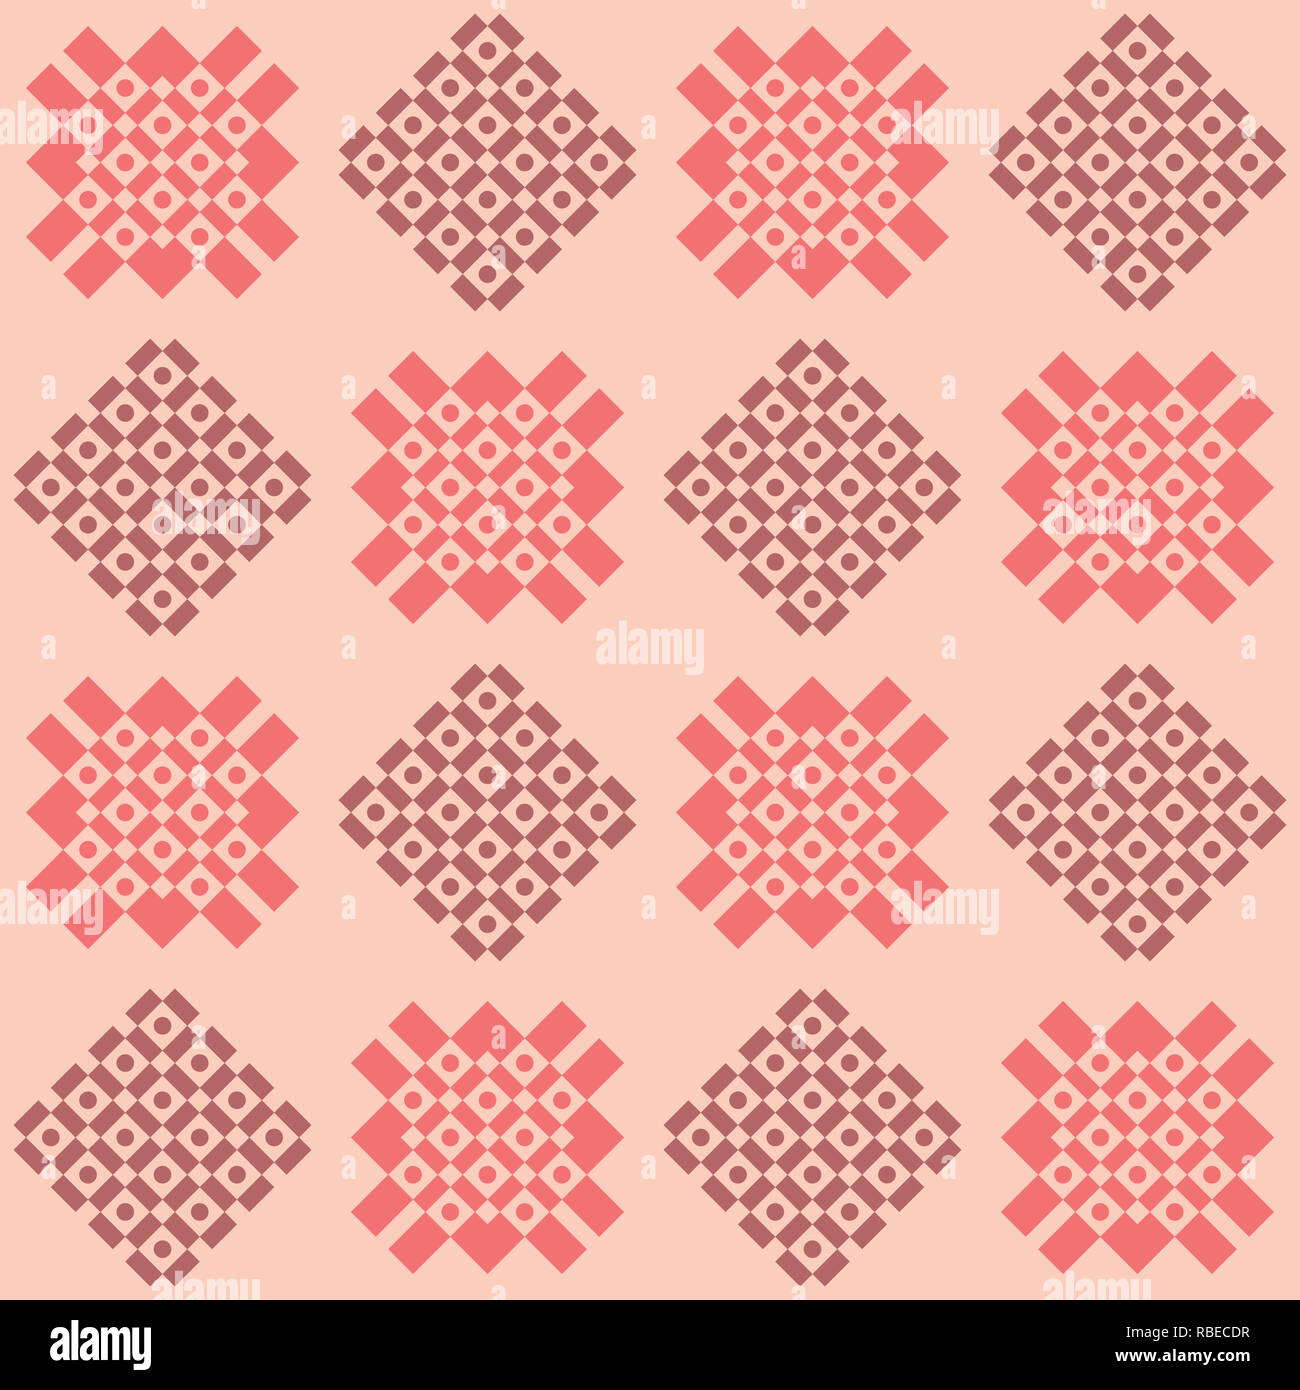 Seamless geometric pattern in shades of pink Stock Photo